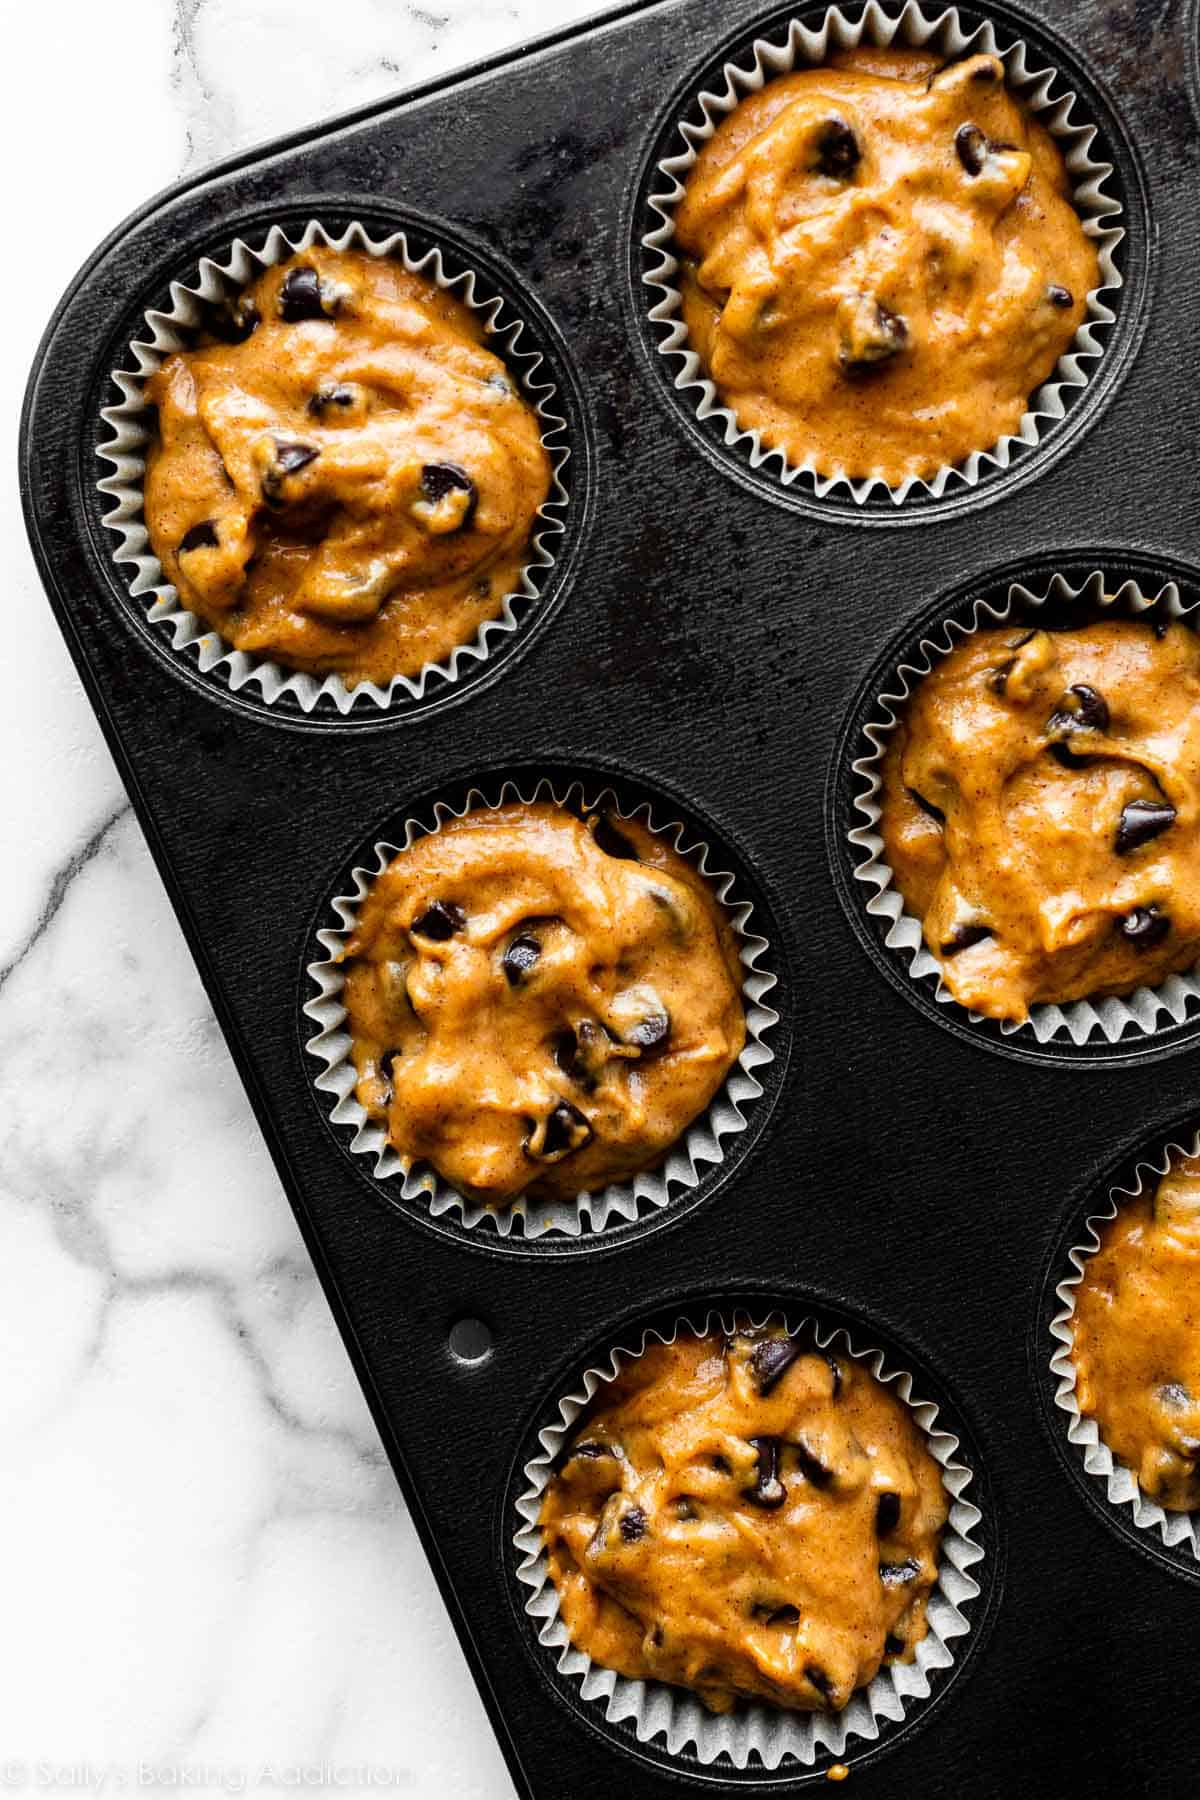 pumpkin batter with chocolate chips in muffin pan.